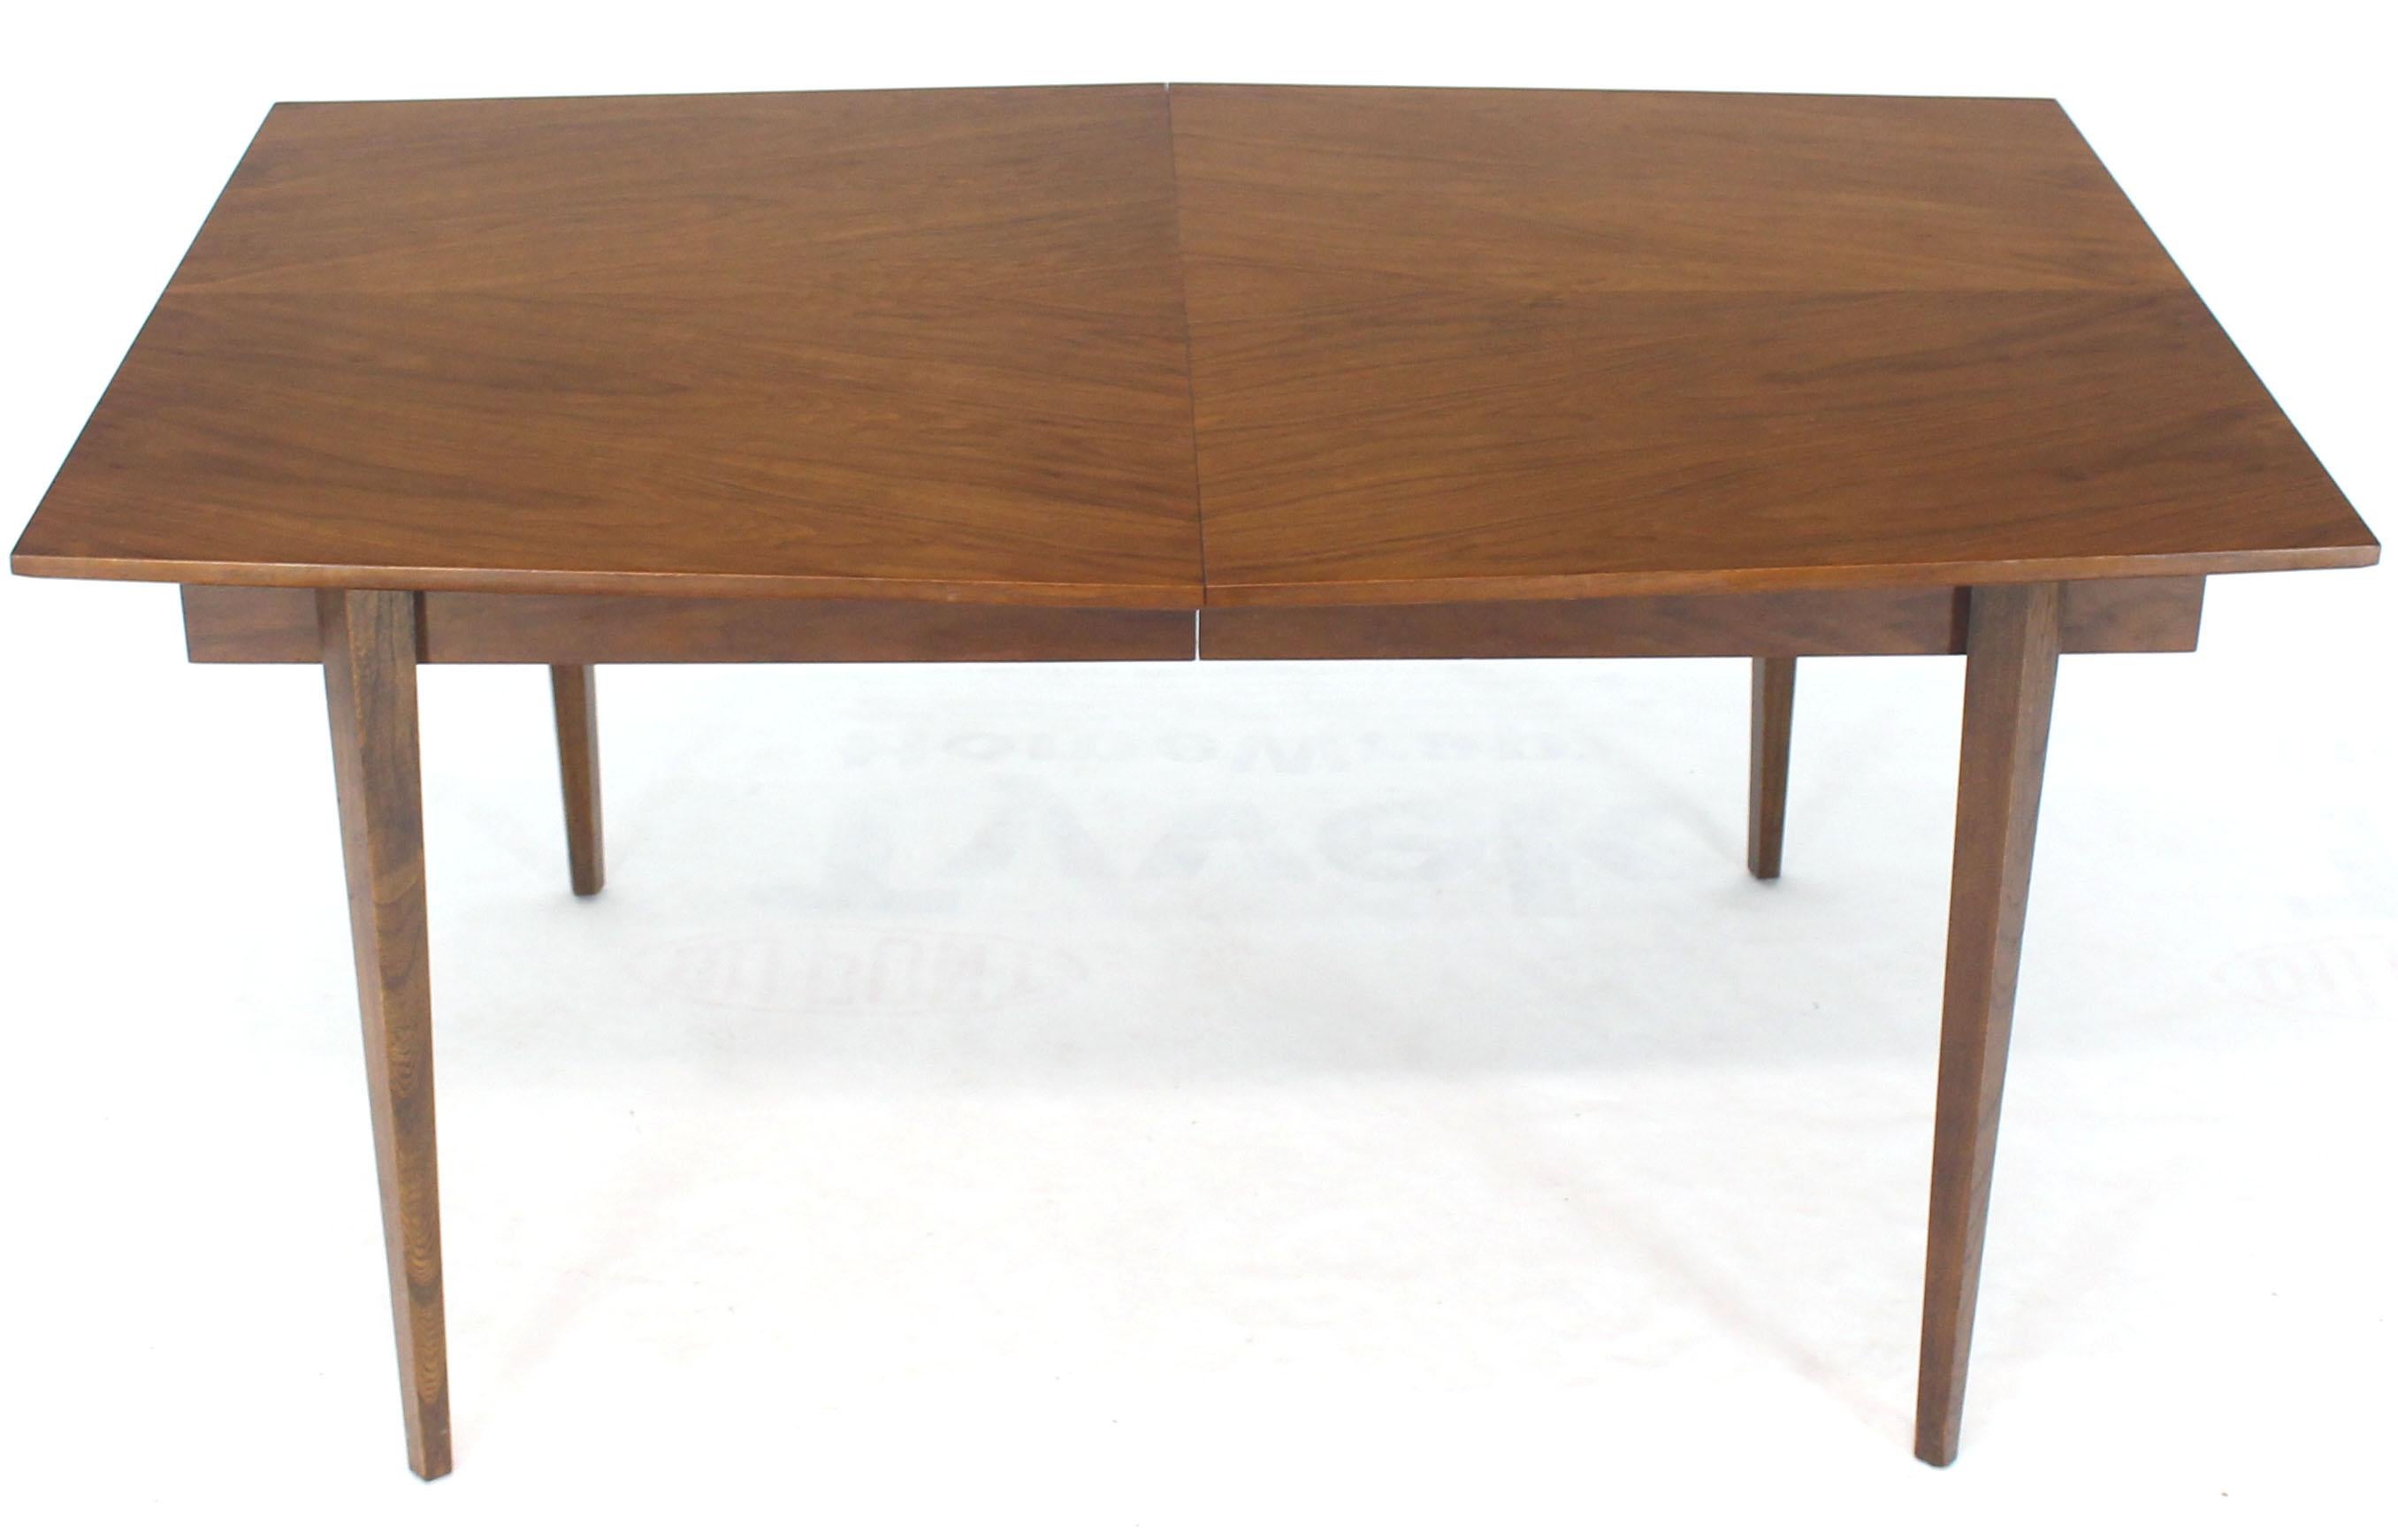 American Danish Mid-Century Modern Walnut Wide Rectangle Dining Table 2 Extension Boards For Sale